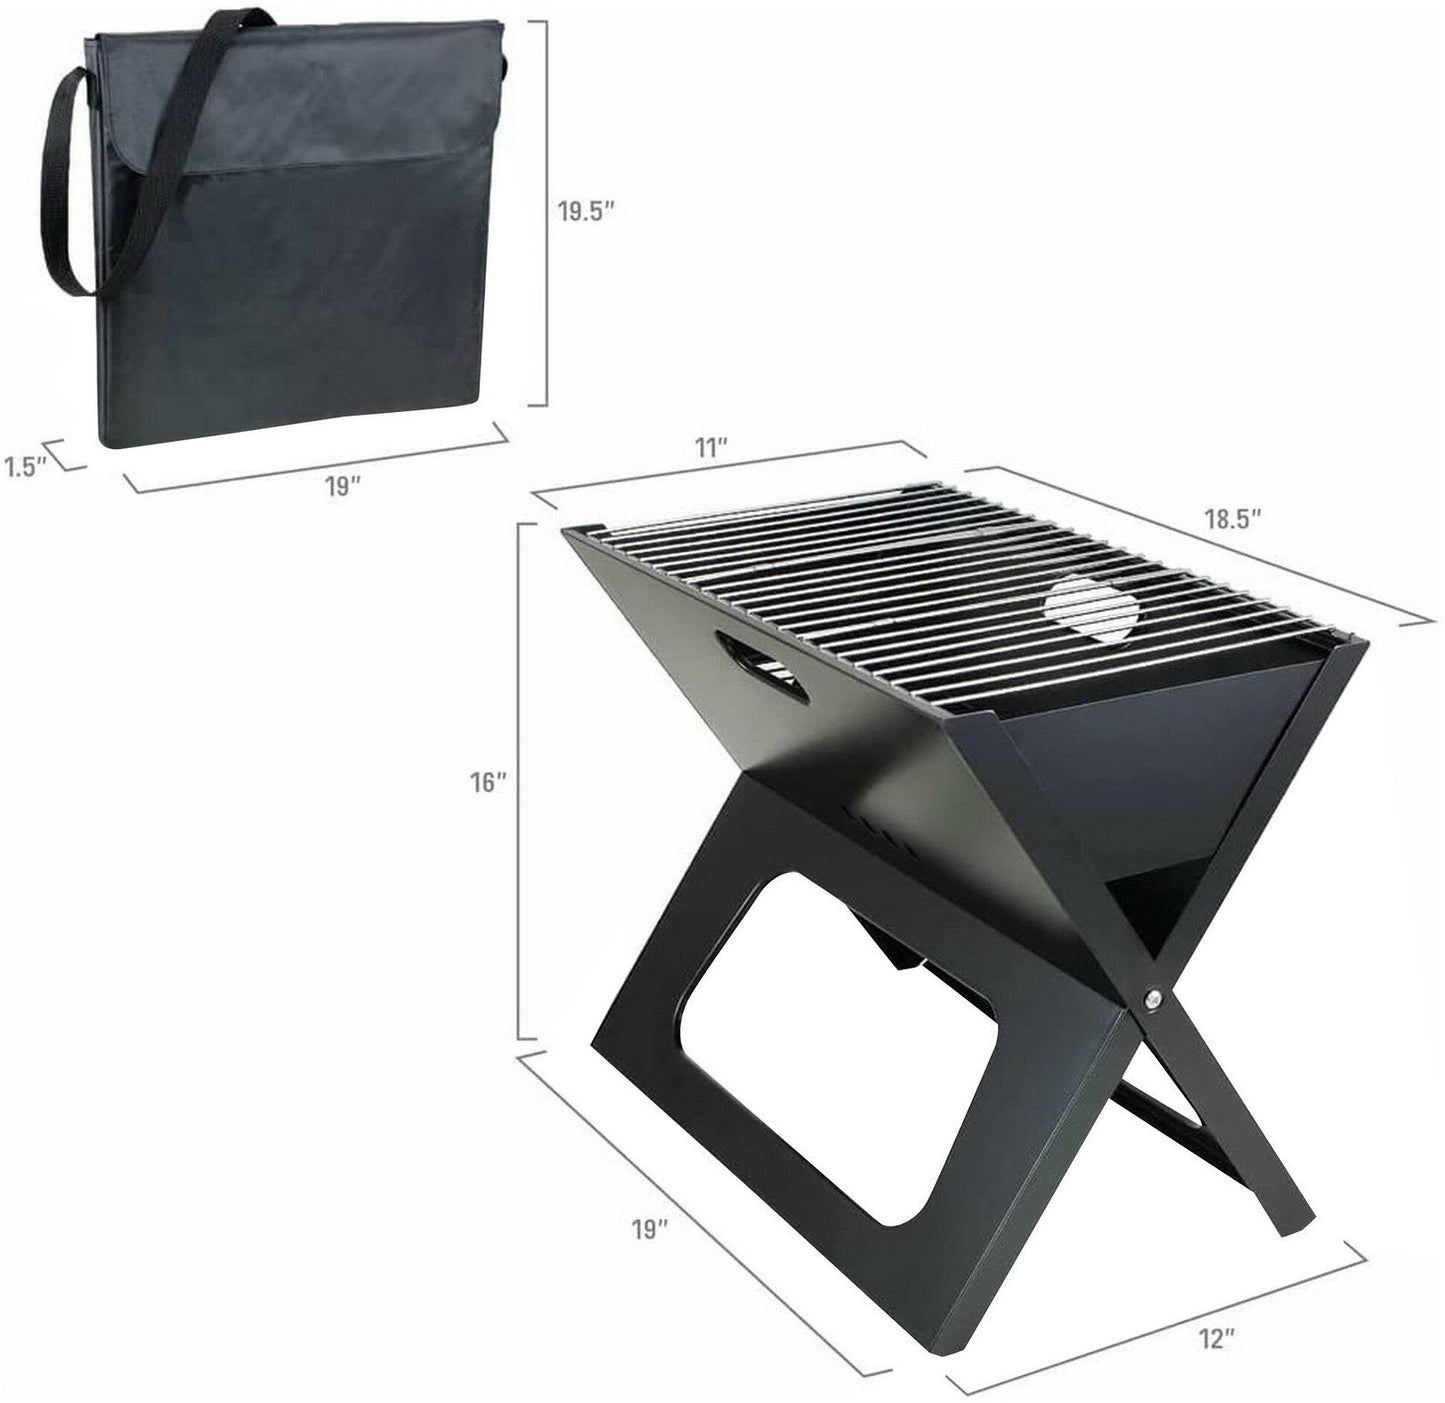 X-Grill Folding Portable Charcoal BBQ Grill Slim with Carry Tote Bag X Grill